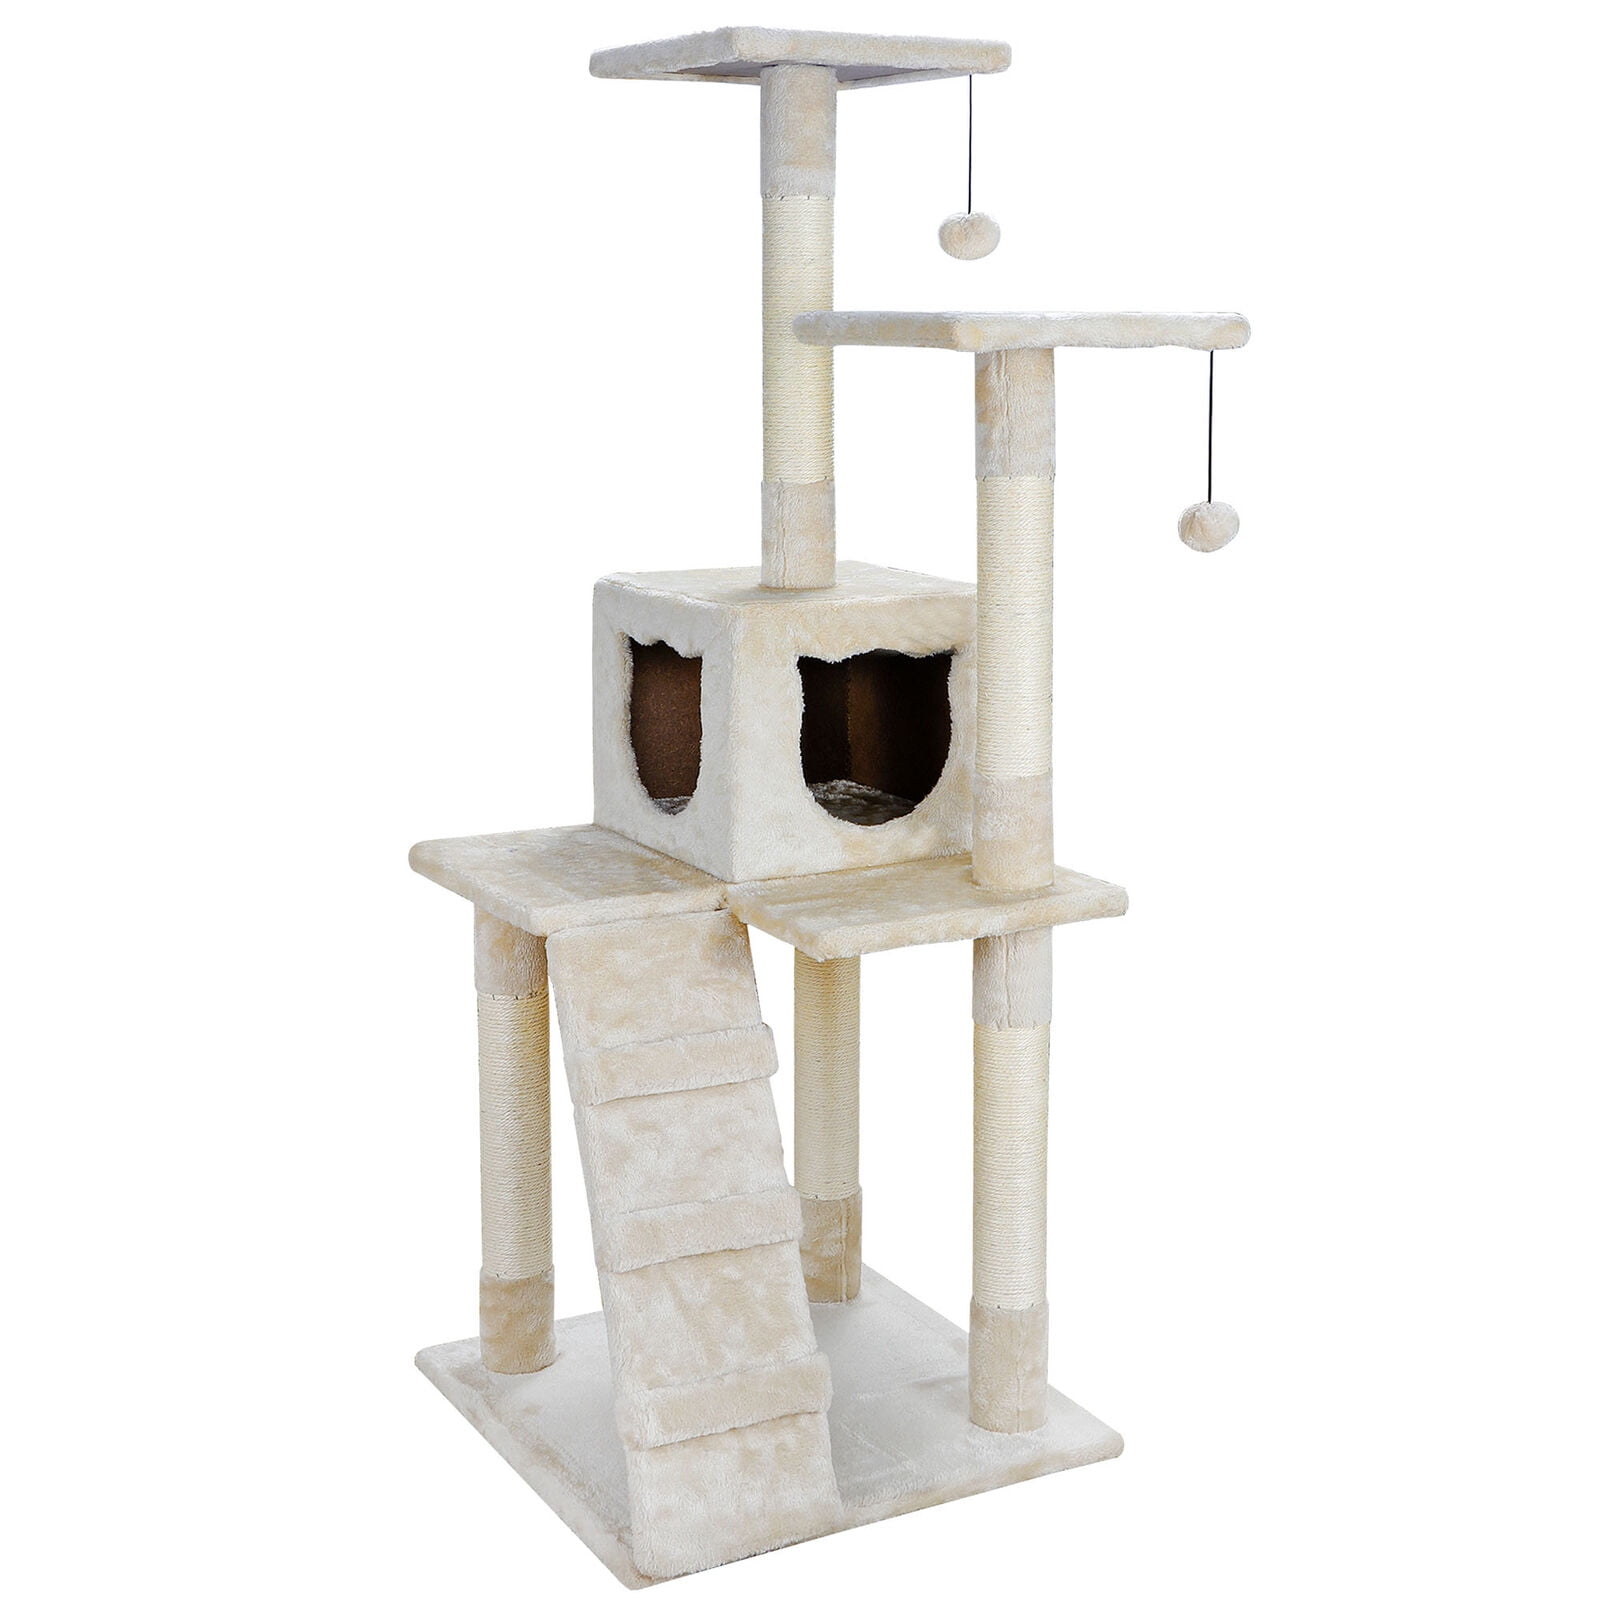 52" 60" 80" Cat Tree Tower Condo Furniture Scratch Post Tree Kitty Play House 